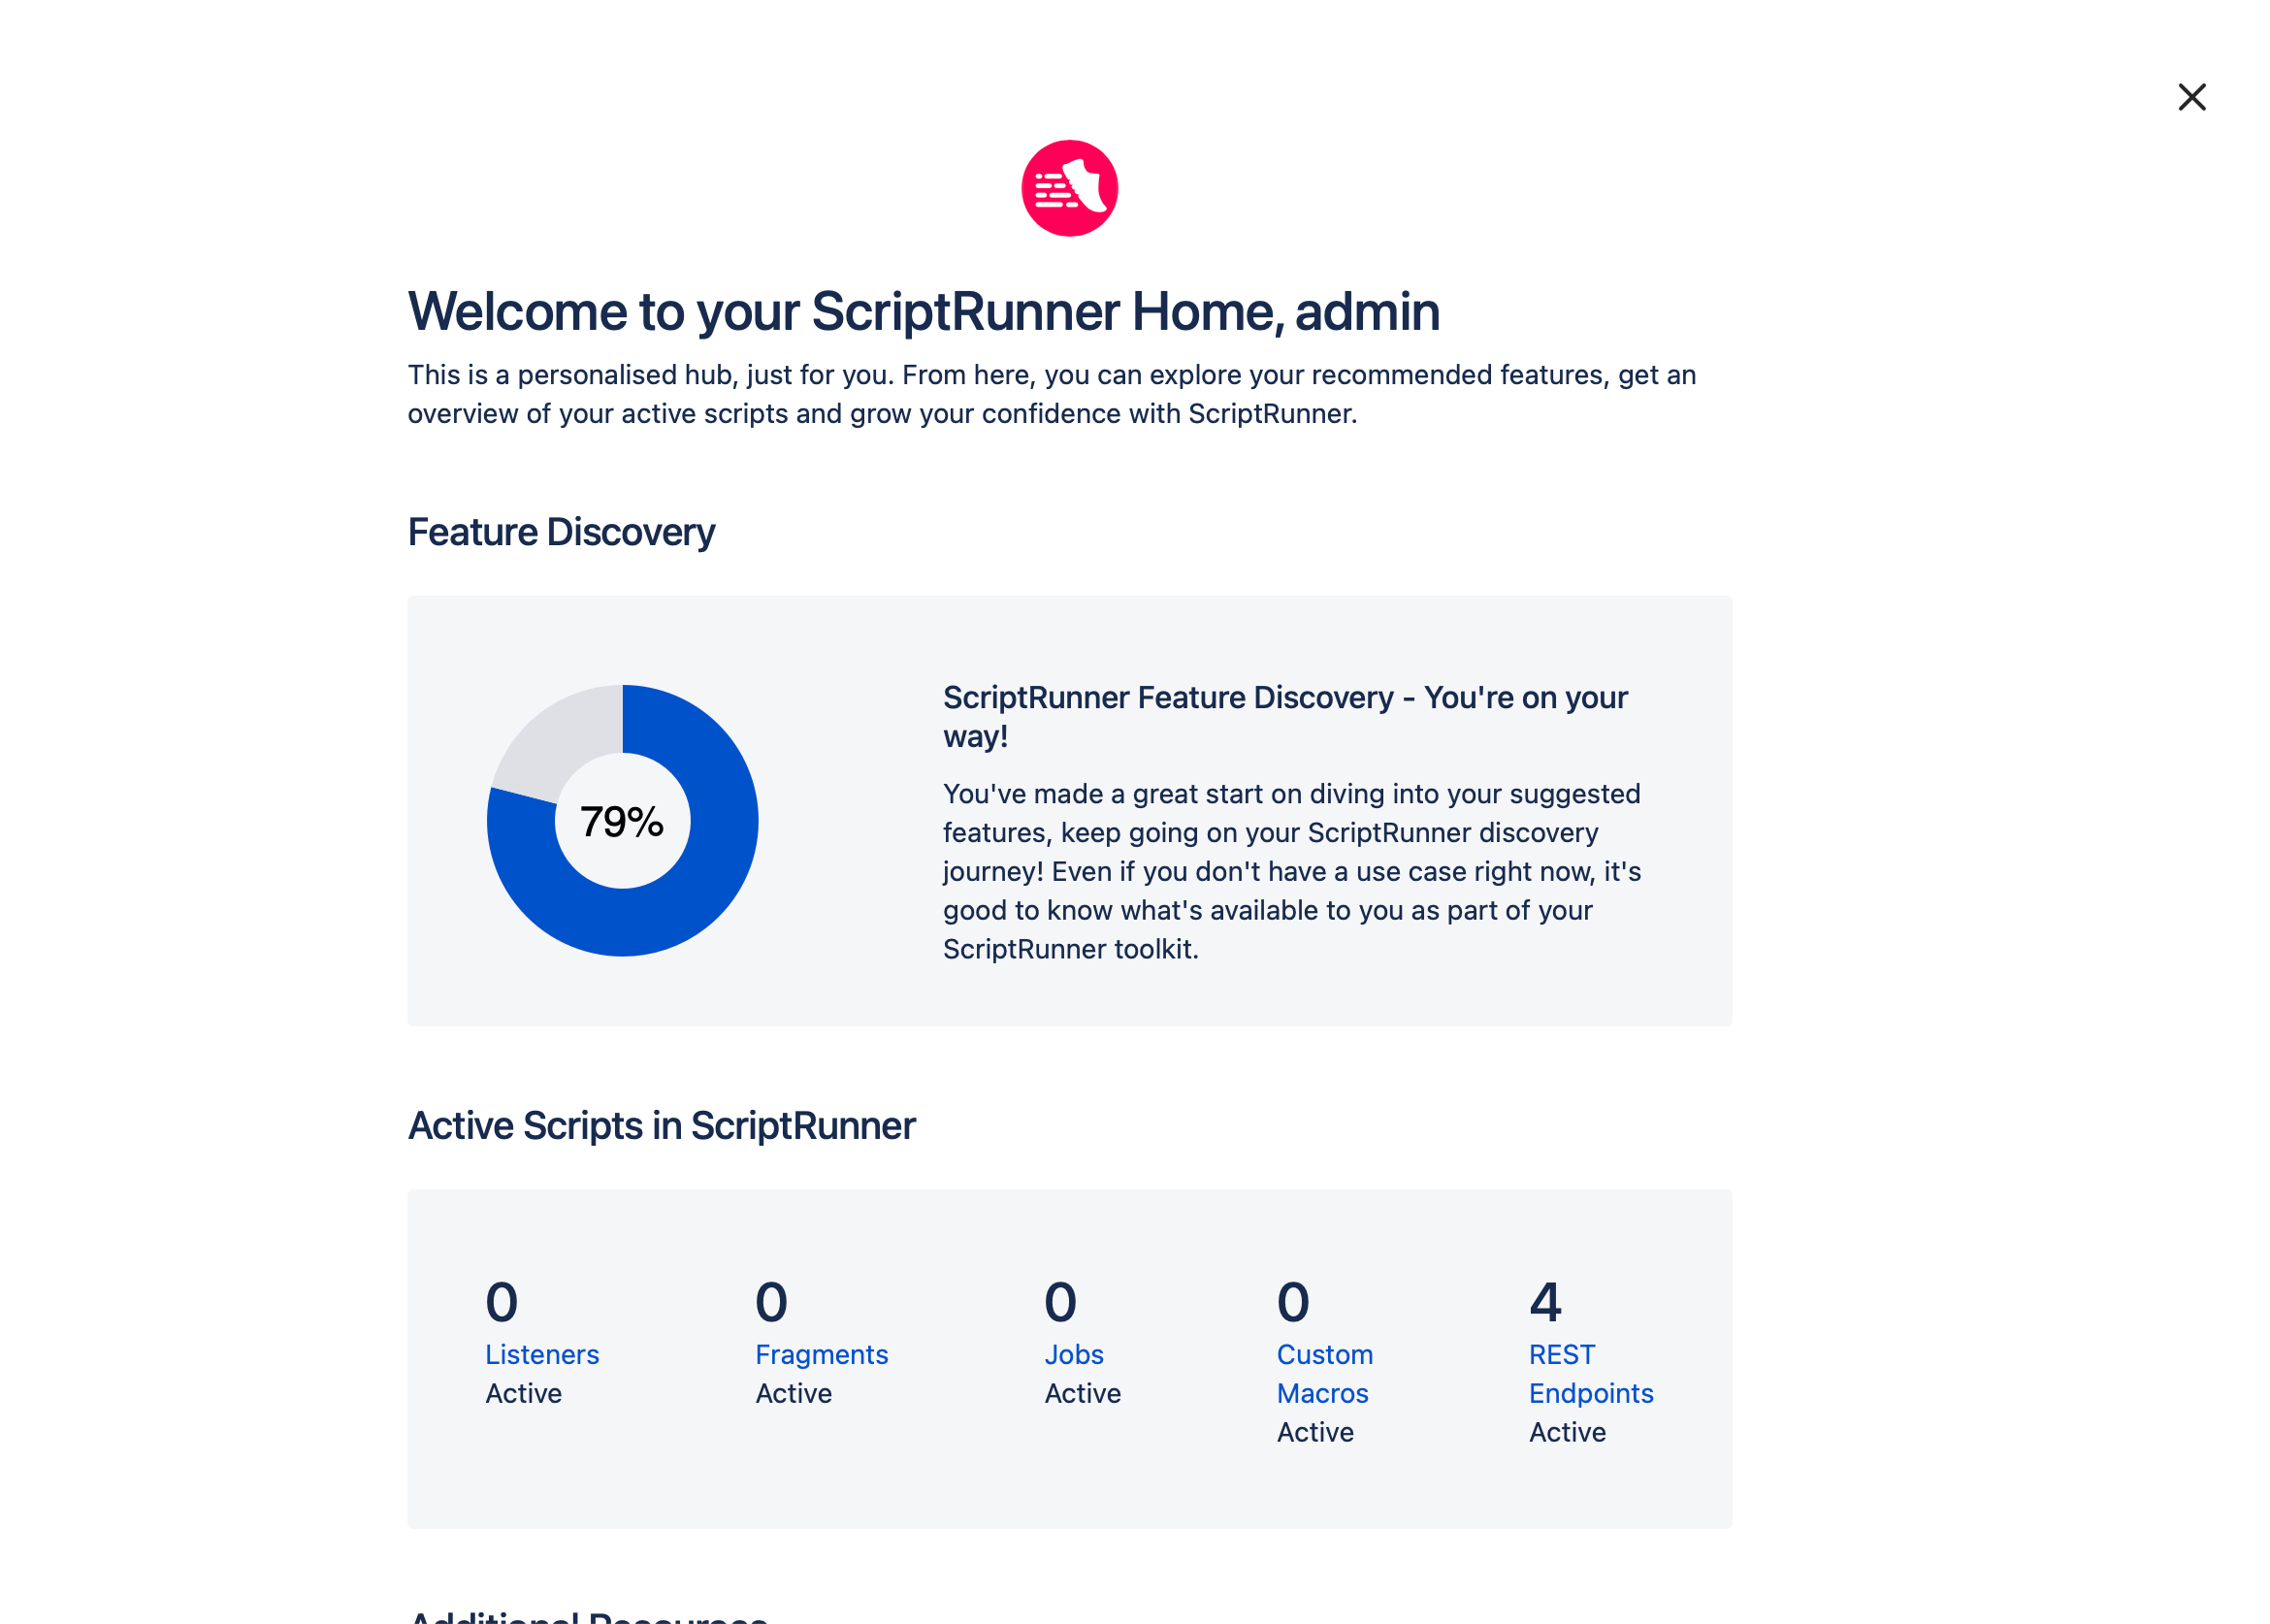 This image shows an example of what you can see when you select the ScriptRunner home screen, including how far you have progressed in Feature Discovery and how many active scripts you have.